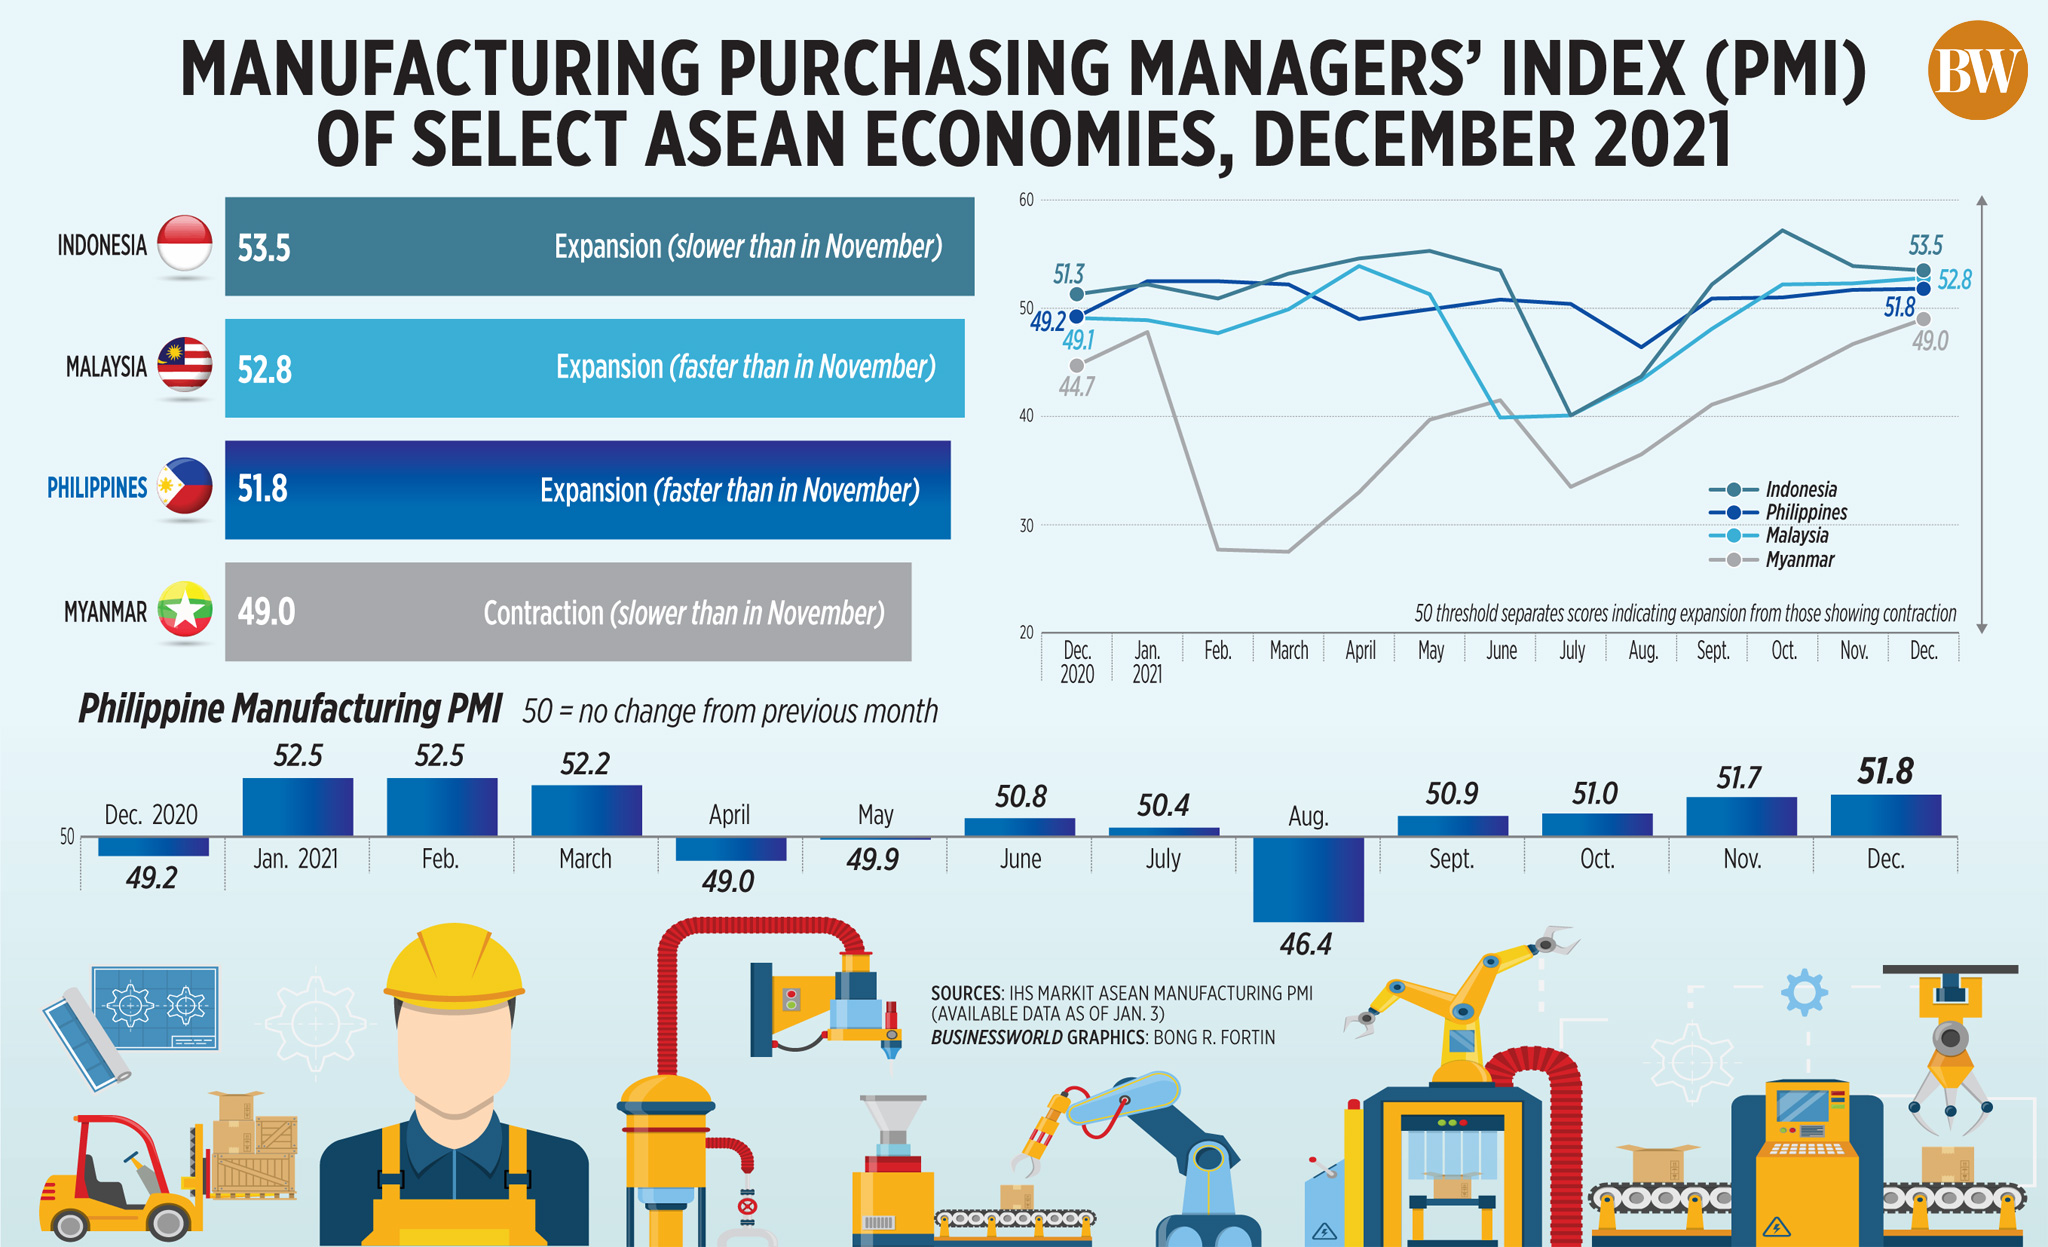 Manufacturing Purchasing Managers’ Index (PMI) of select ASEAN Economies, December (2021)